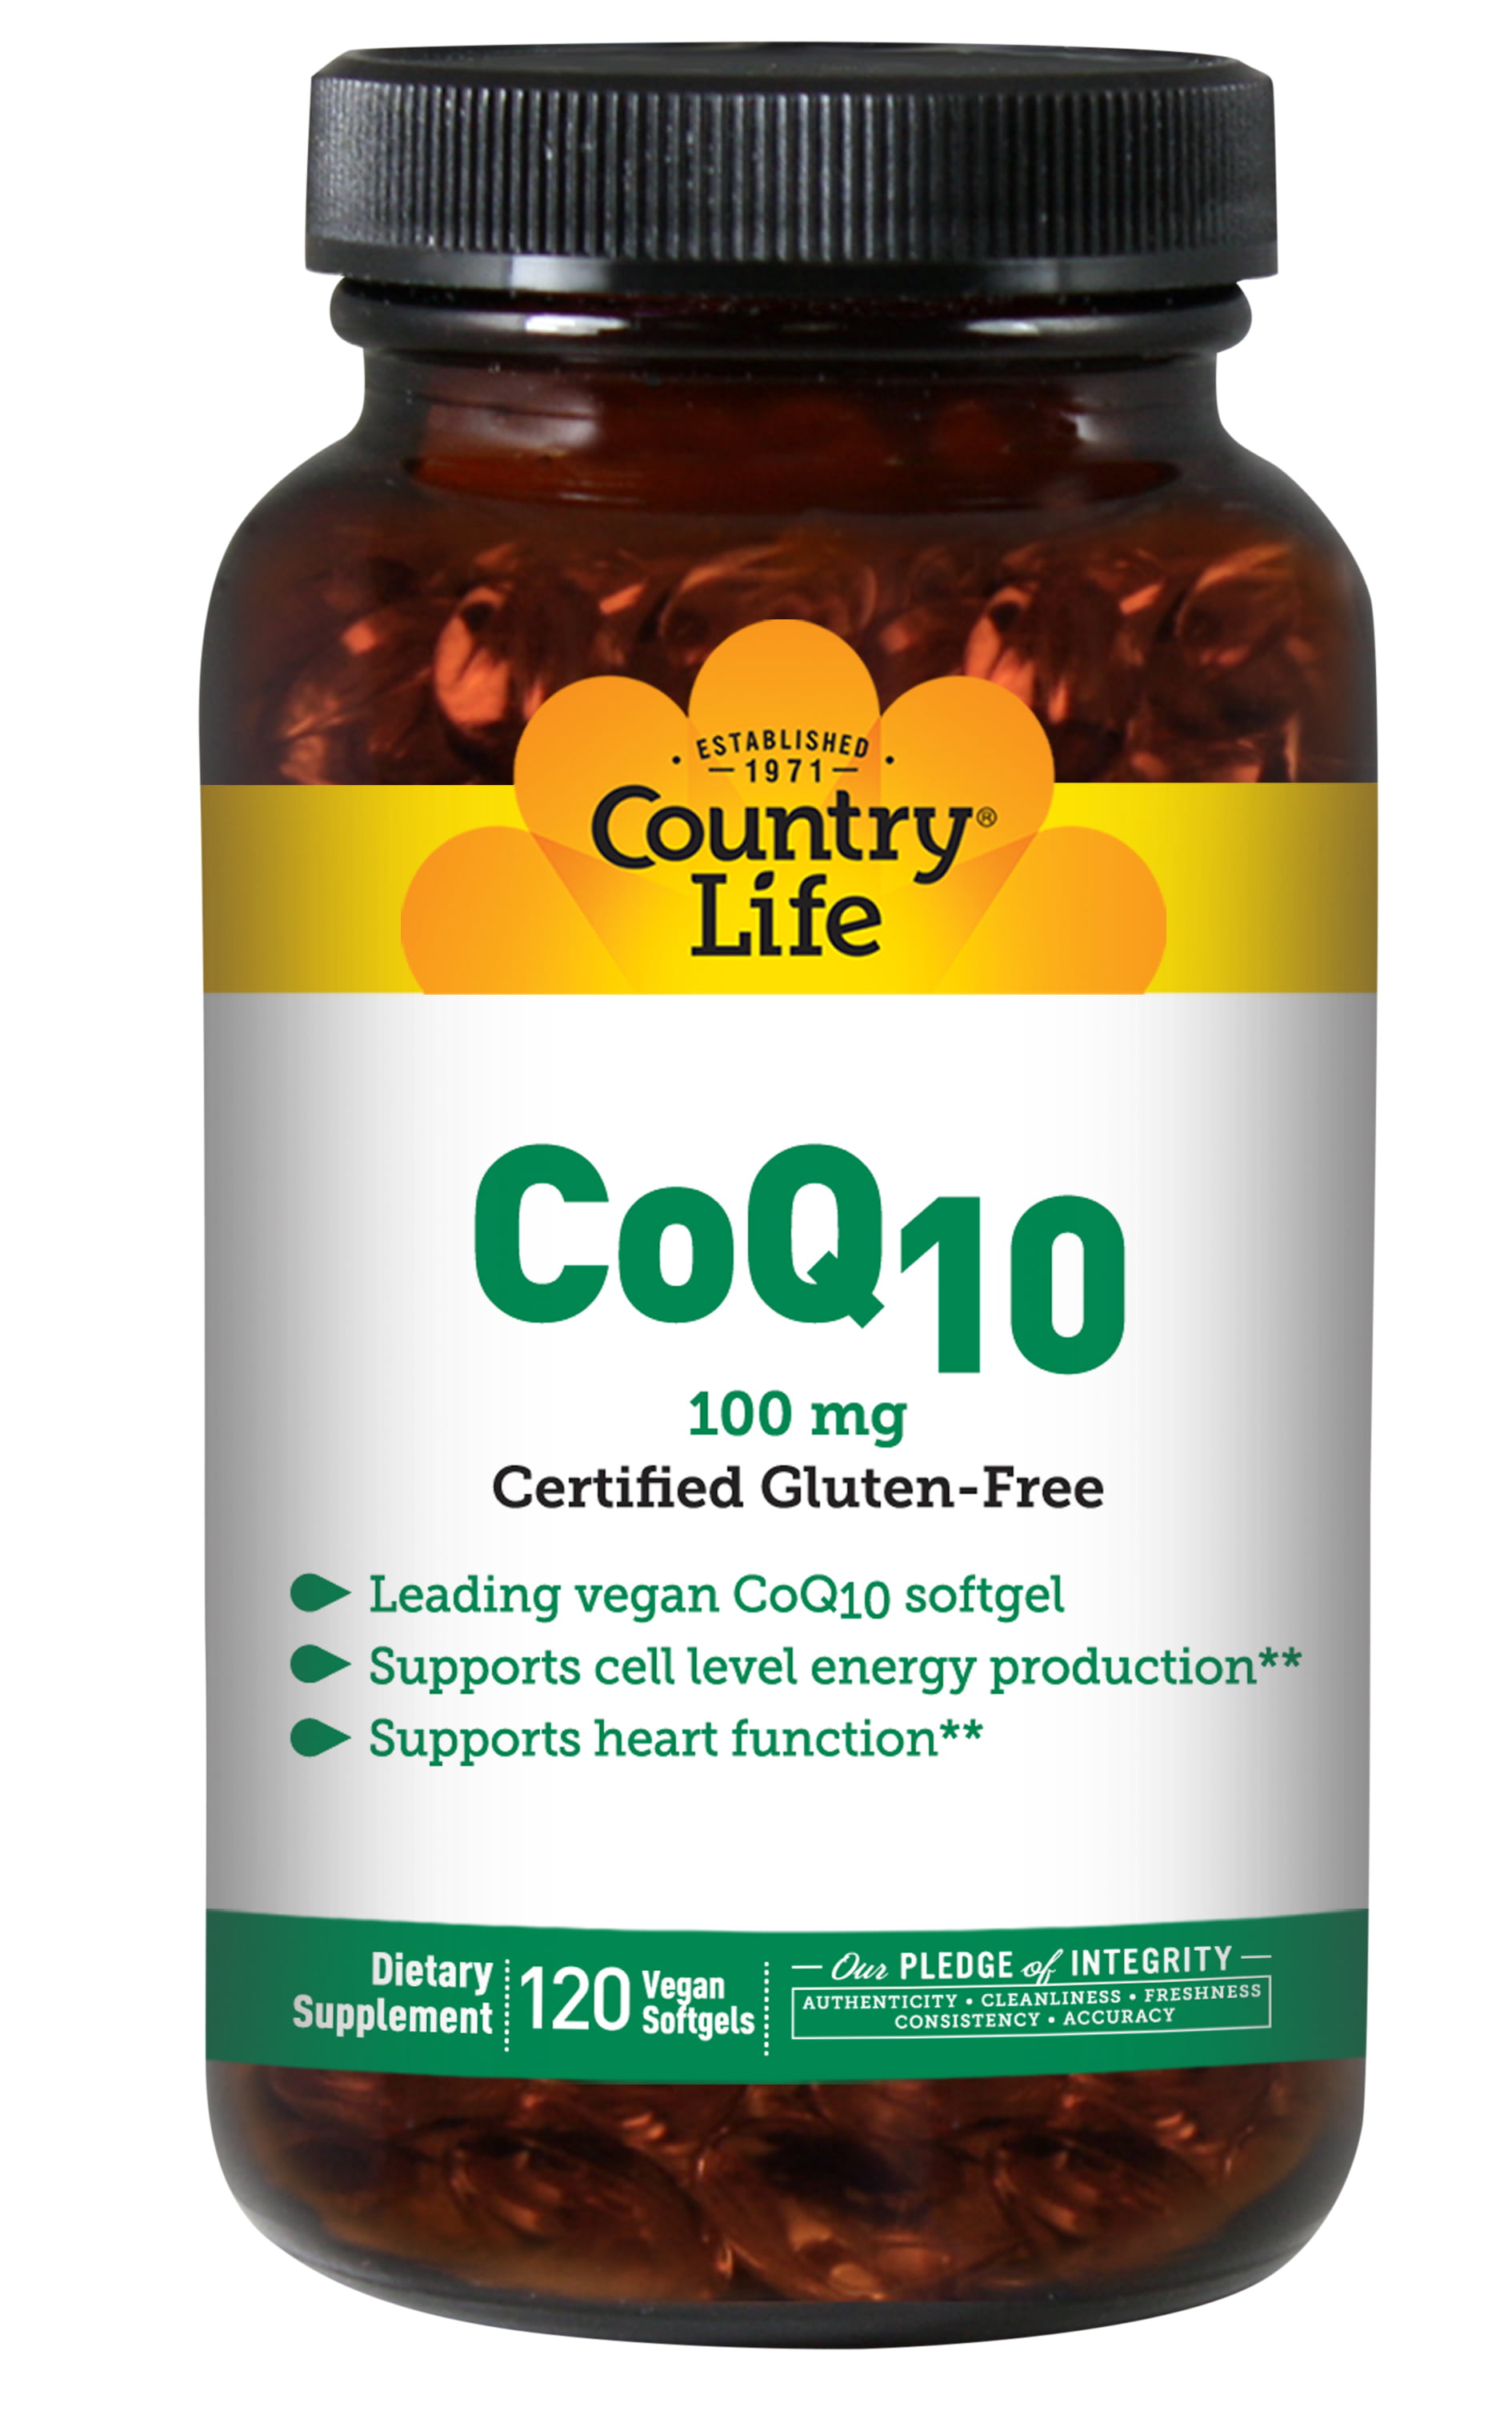 Country Life Simply Coq10 Supports Heart Function 100mg 120 Softgels Certified Gluten Free